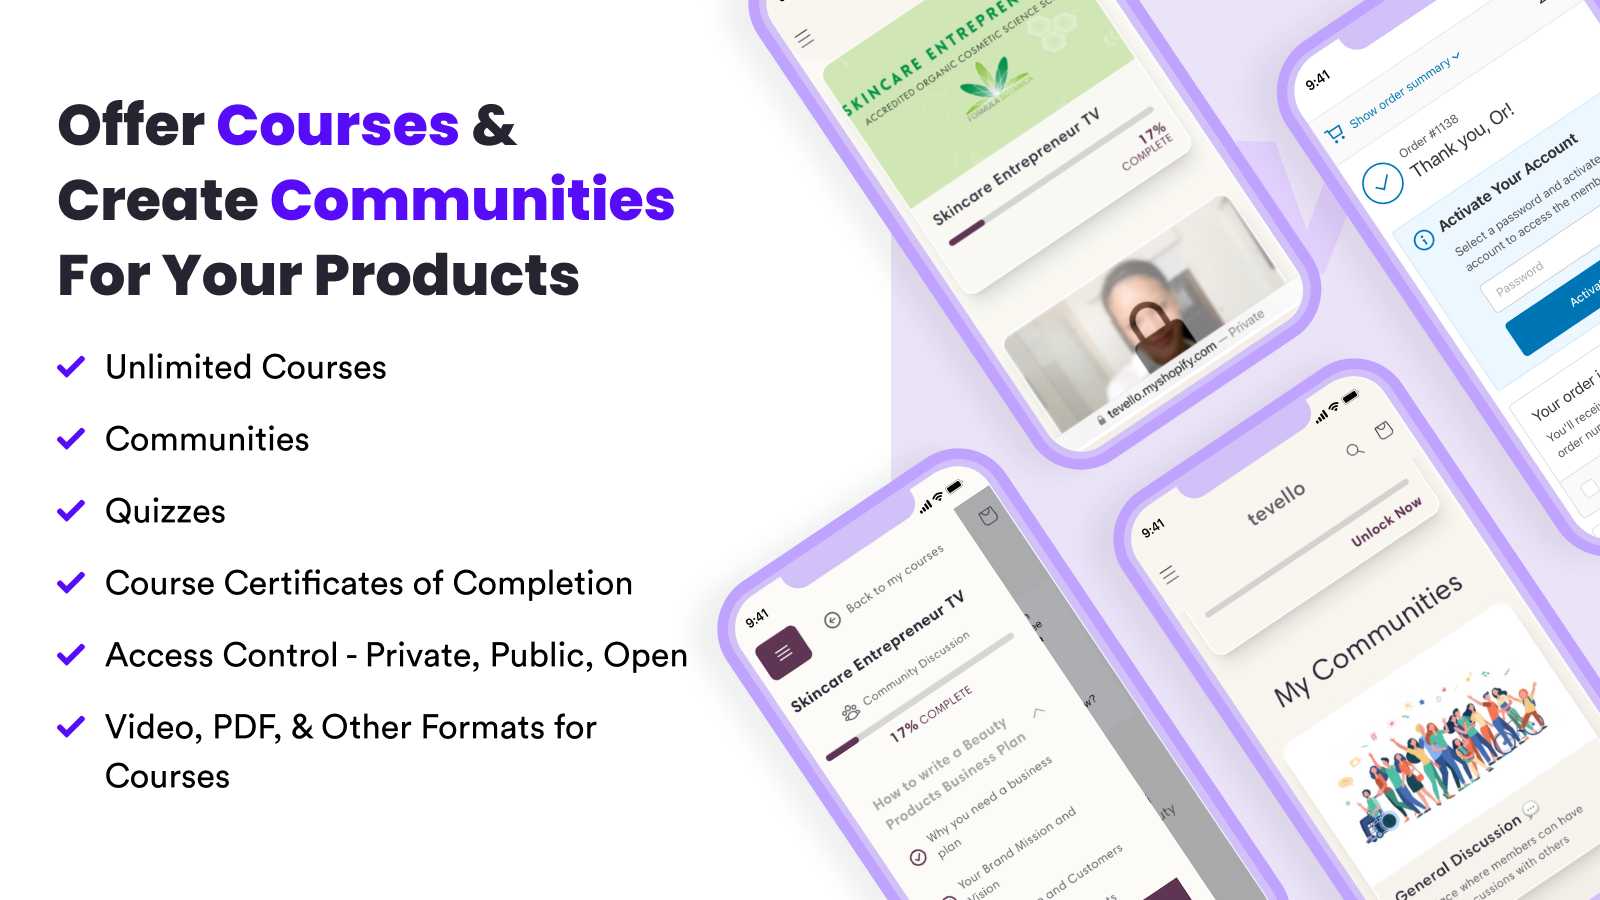 Offer Courses & Create Communities For Your Products